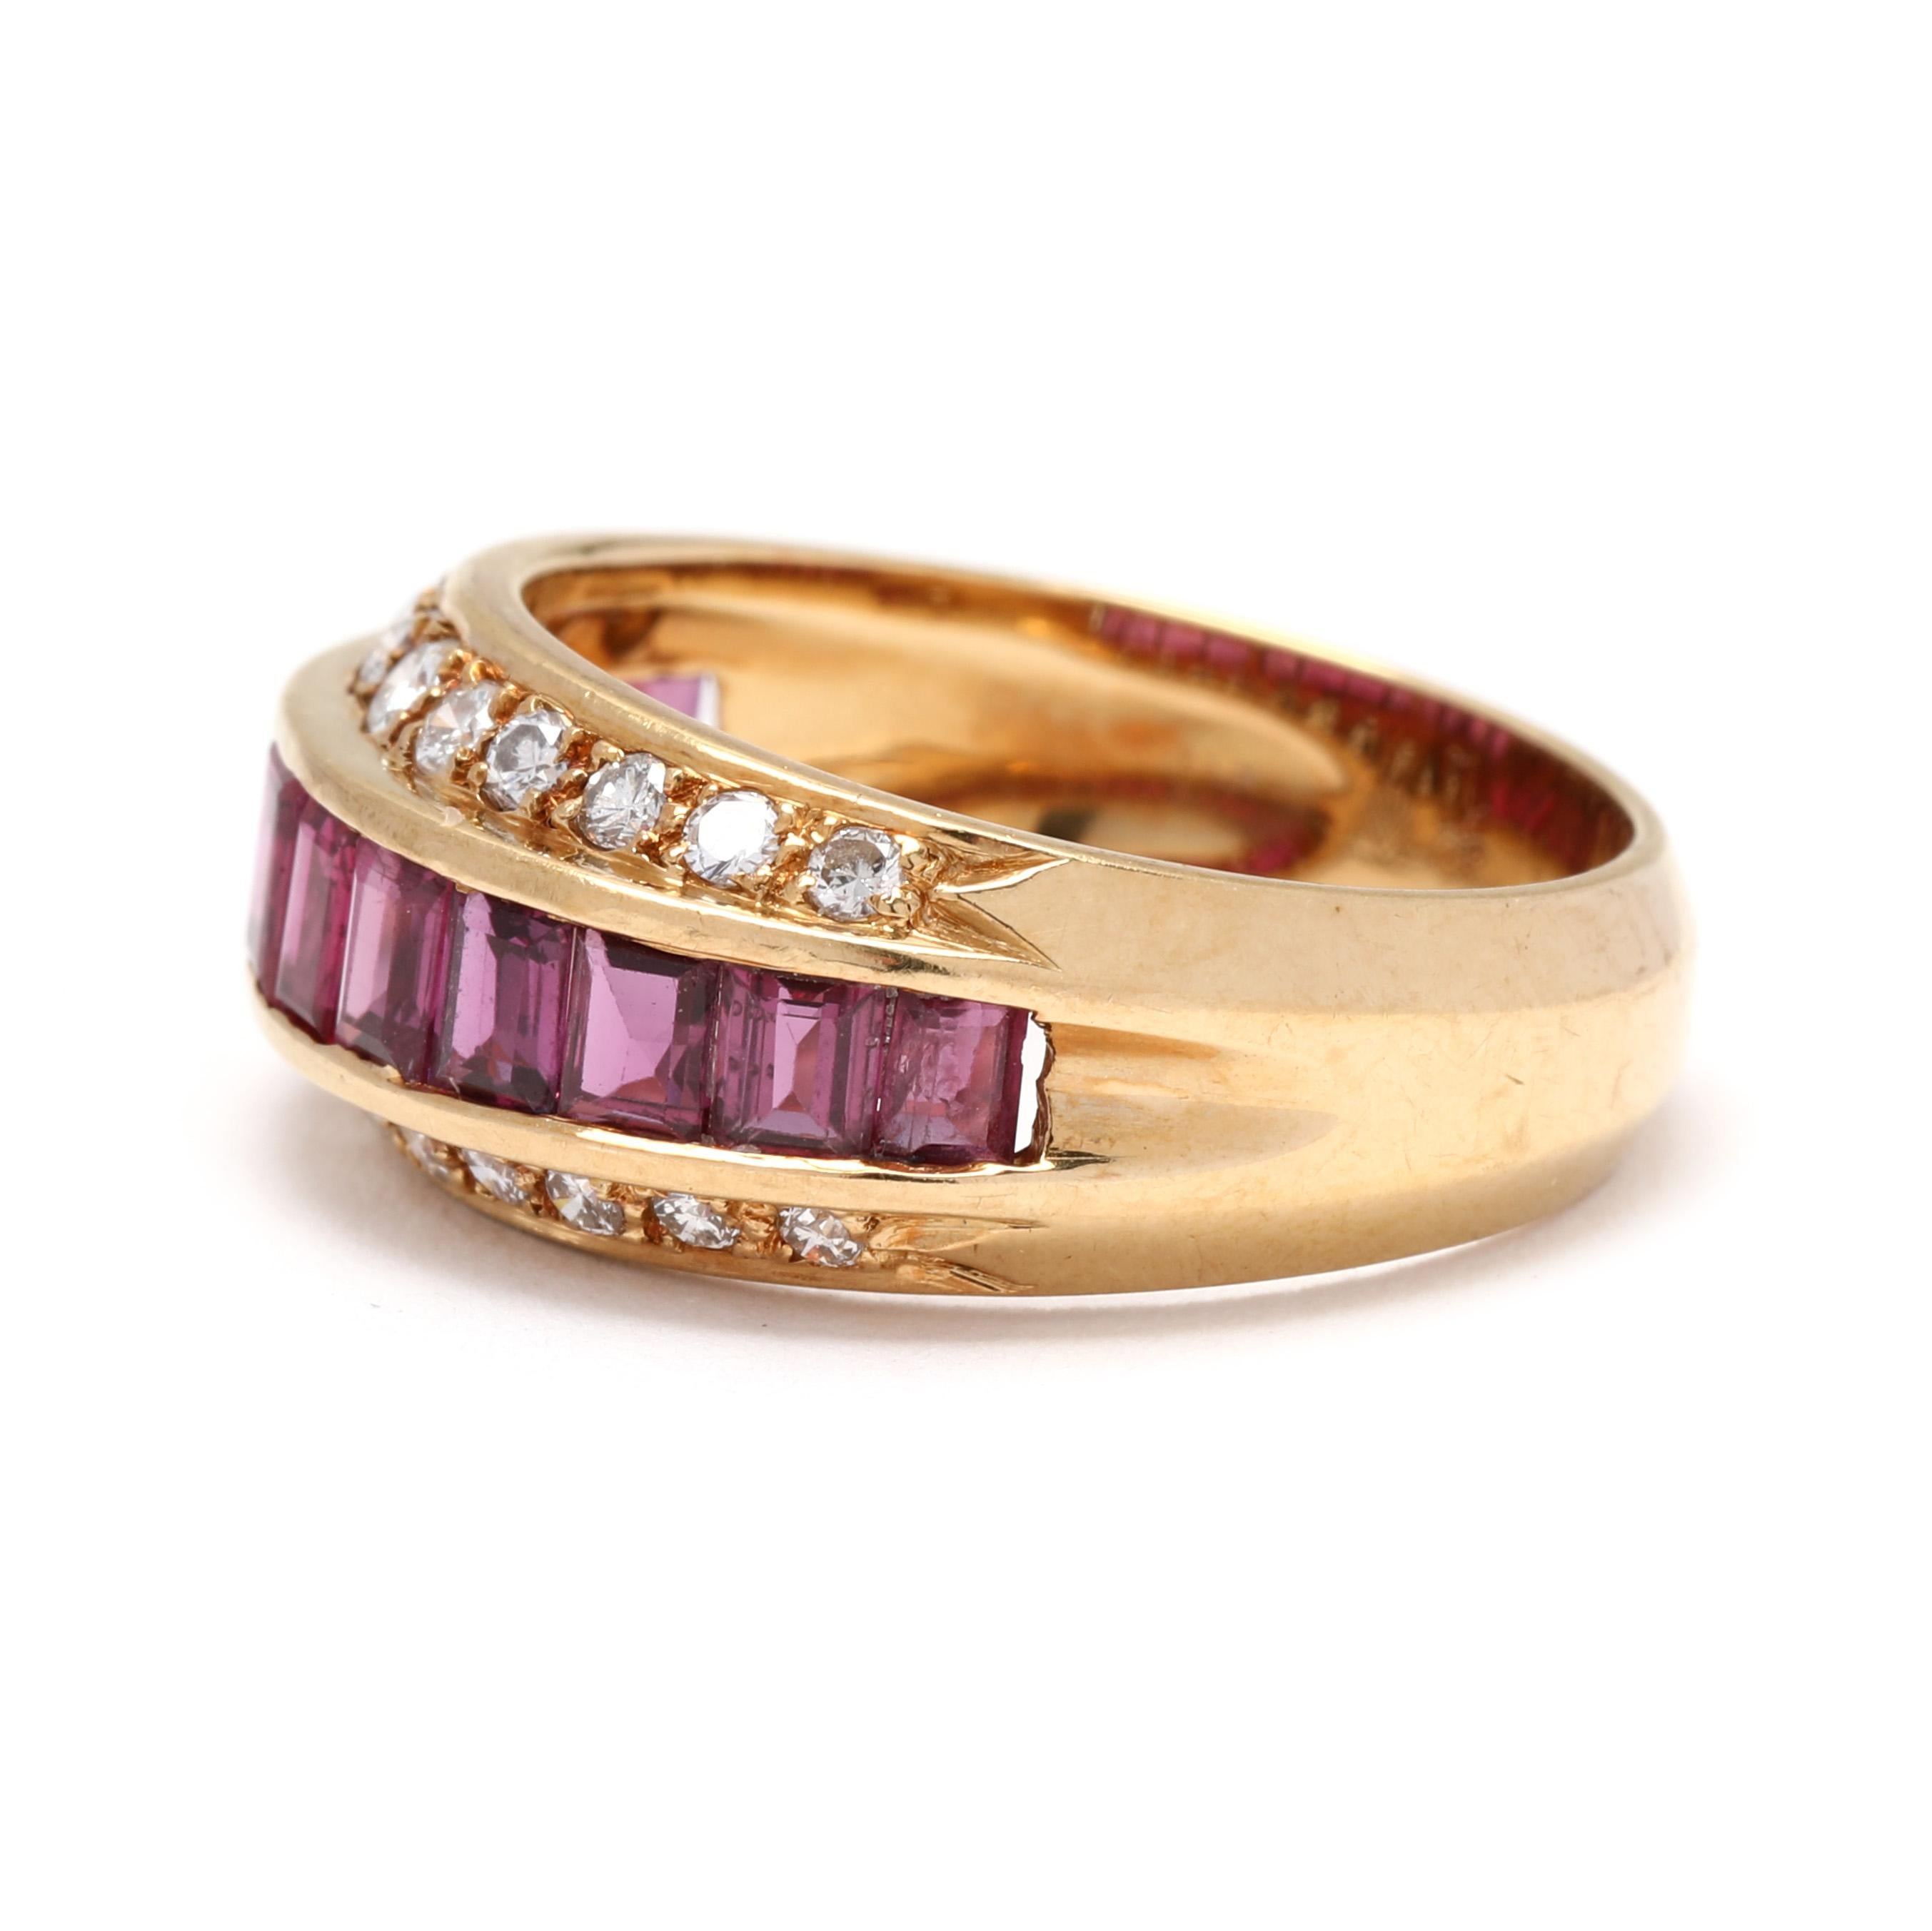 1.75ctw Diamond and Ruby Band Ring, 18k Yellow Gold, Ring Size 6.25, Baguette In Good Condition For Sale In McLeansville, NC